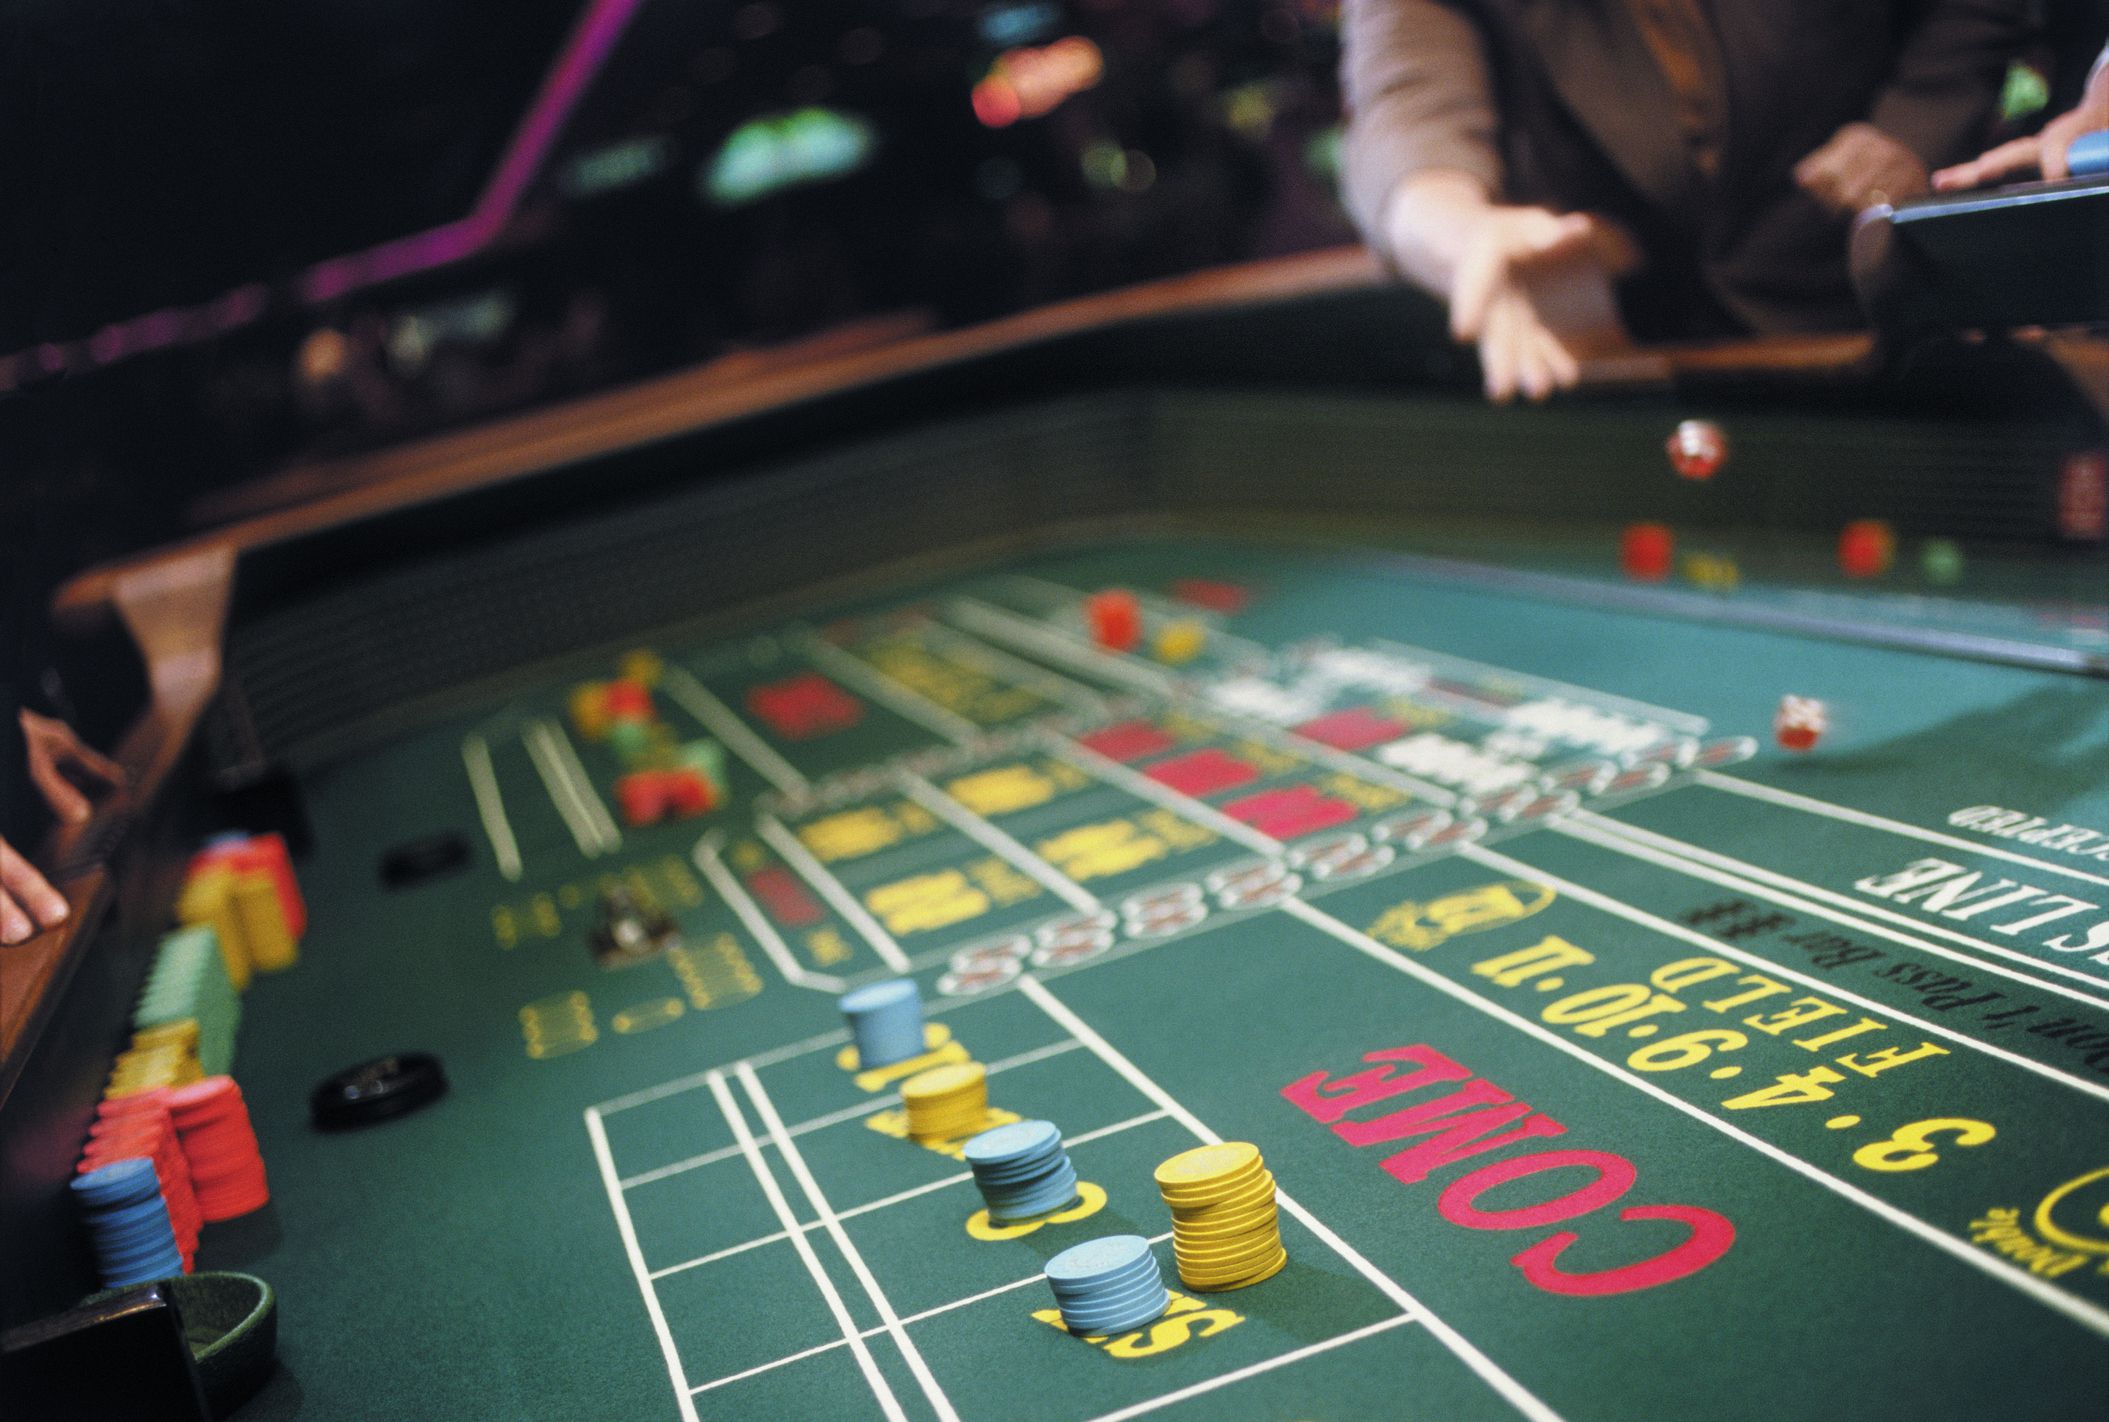 How To Play Casino Games